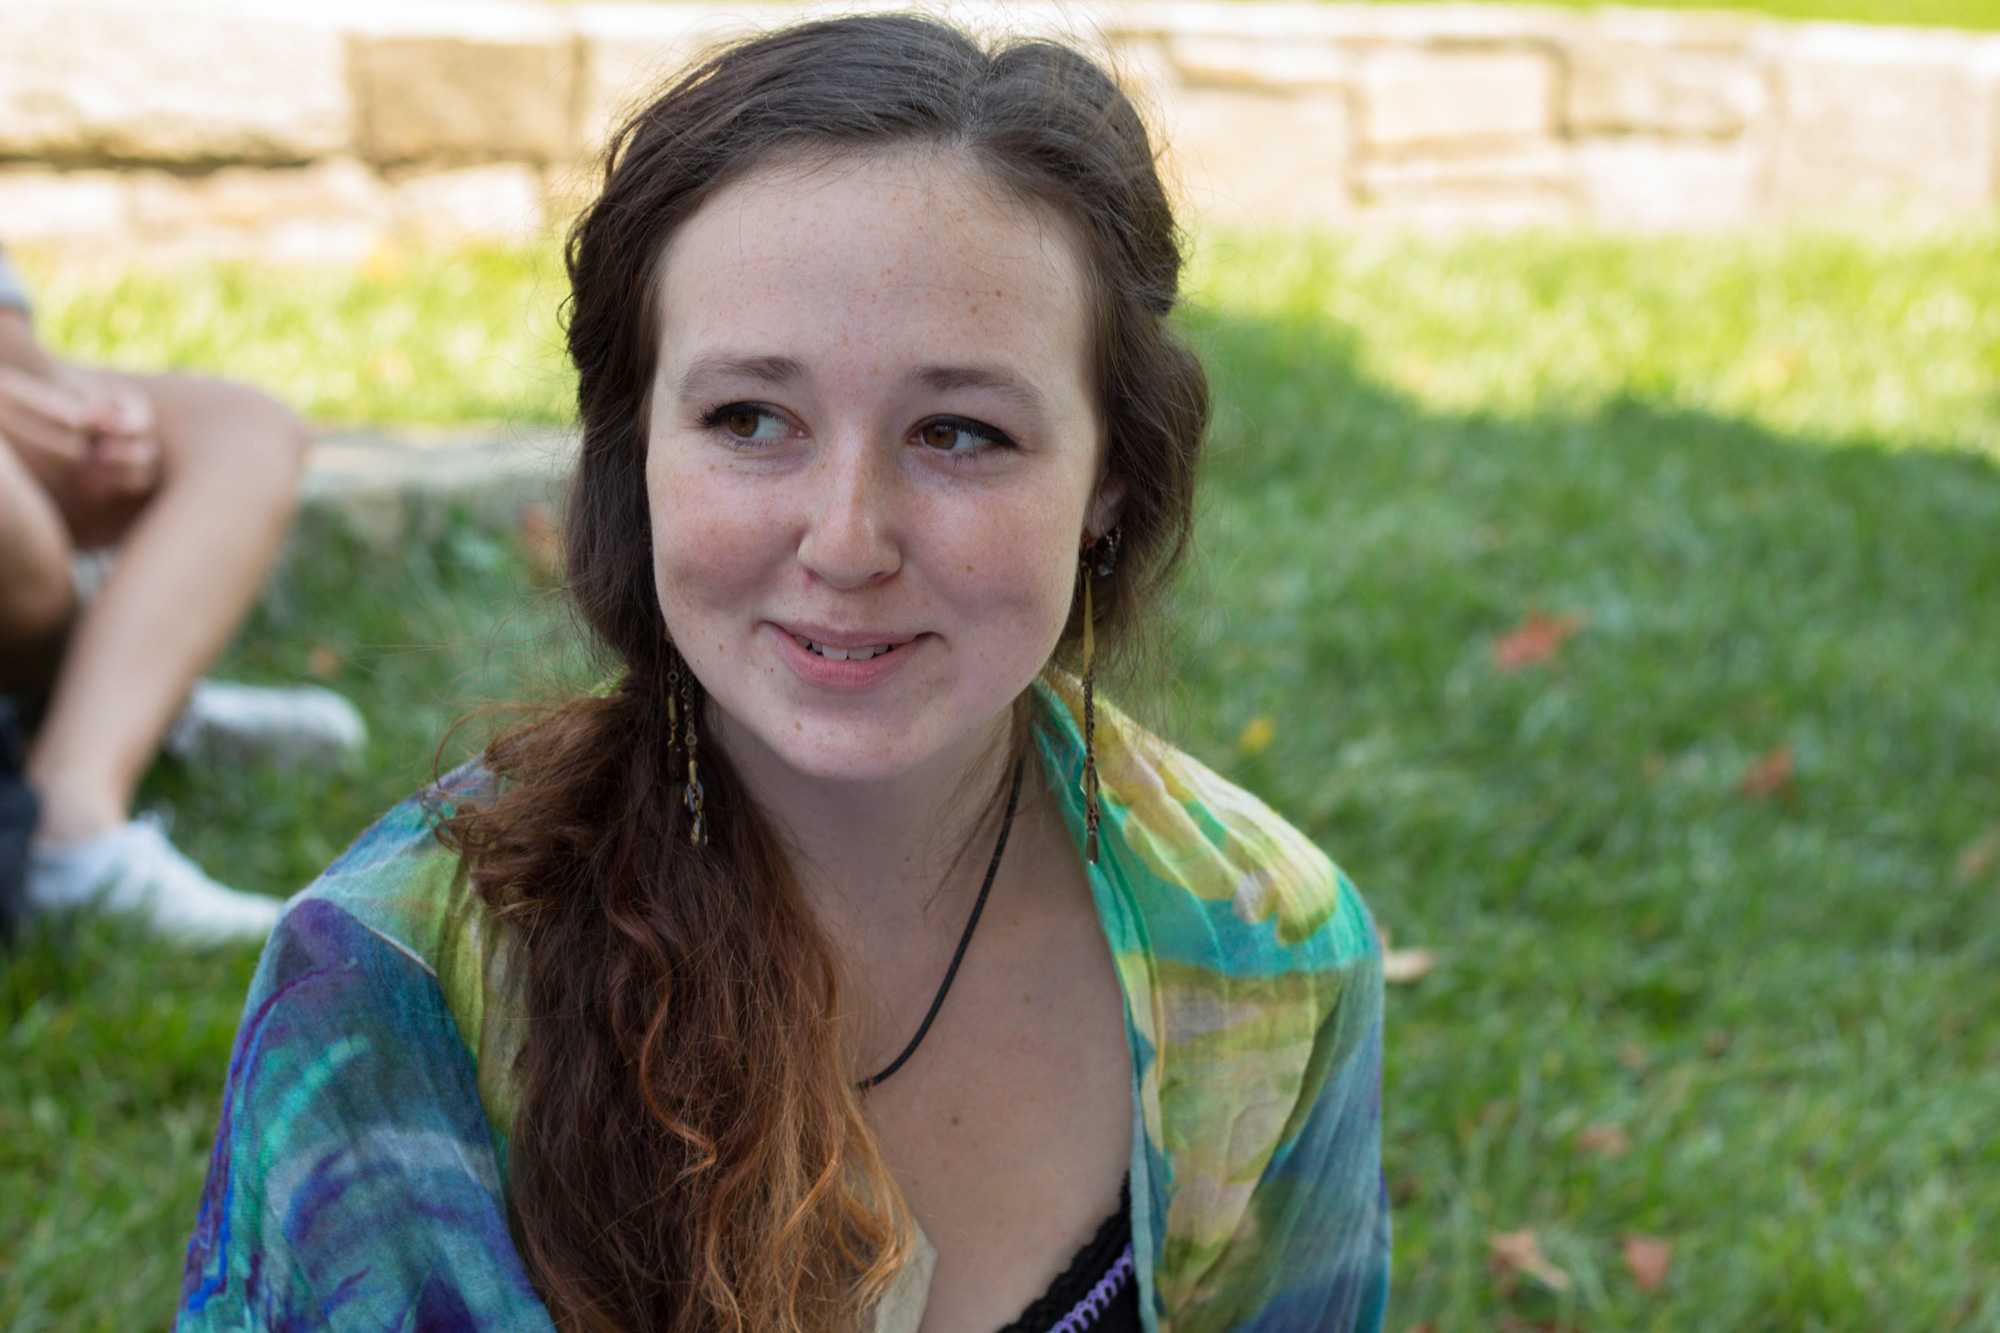 Senior art education major Shauna Caldwell started  the annual event Art Drop Day on App State’s campus last year.